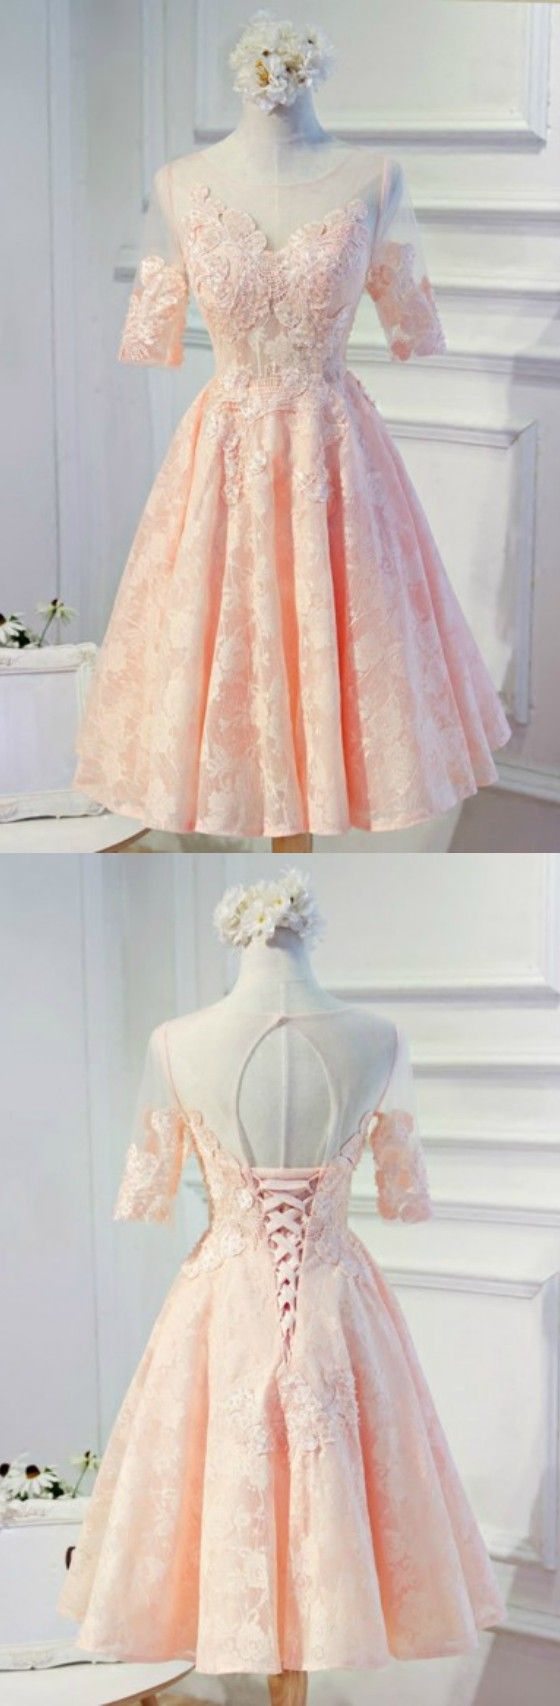 Feminine A-Line Scoop Homecoming Dresses Lace Muriel Neck Tea-Length Tulle With Appliques CD5687